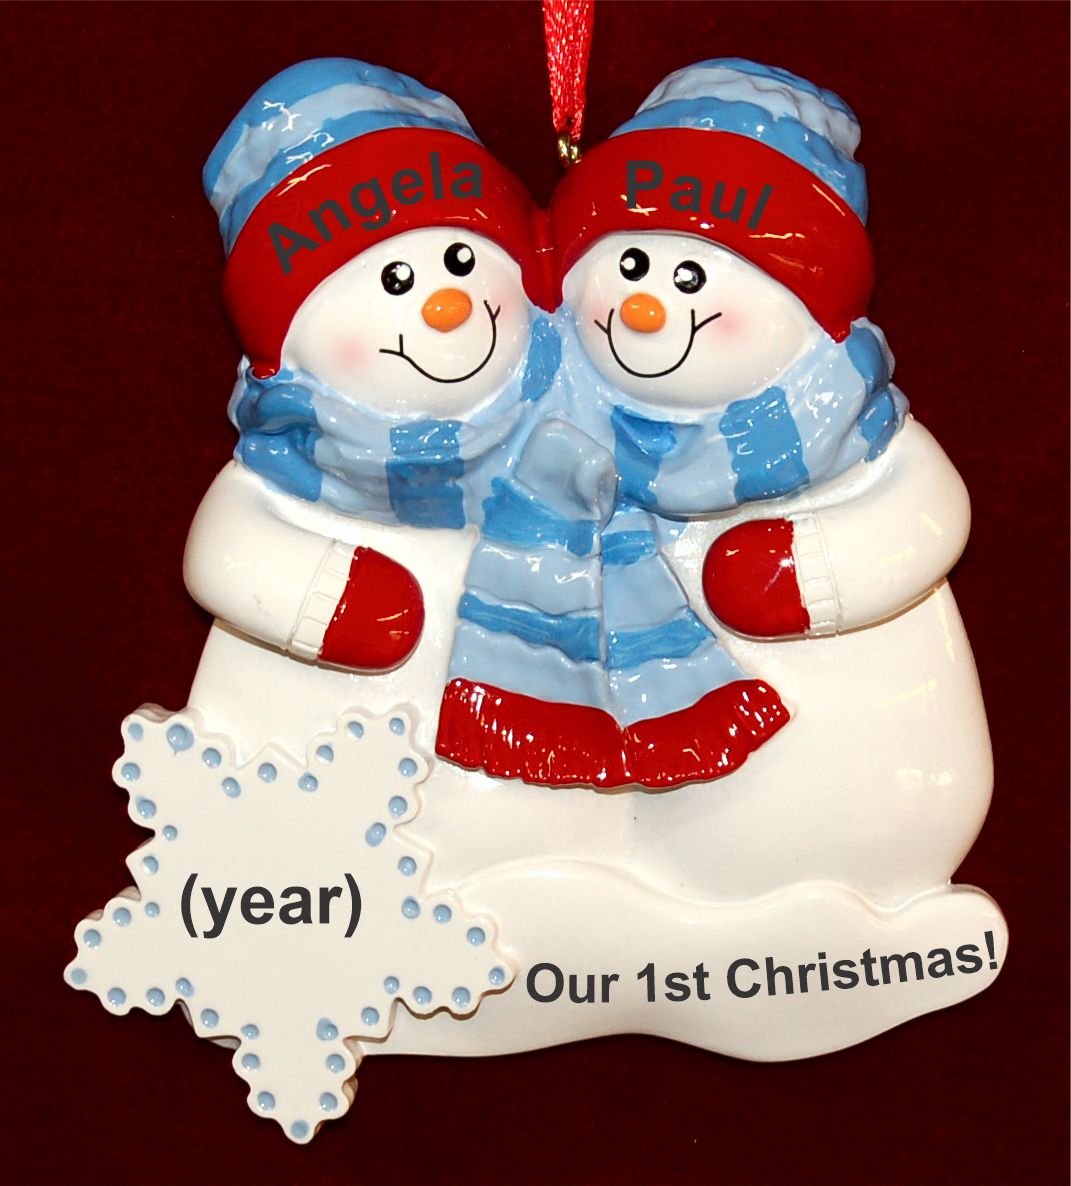 Our 1st Christmas Together Ornament Personalized by RussellRhodes.com